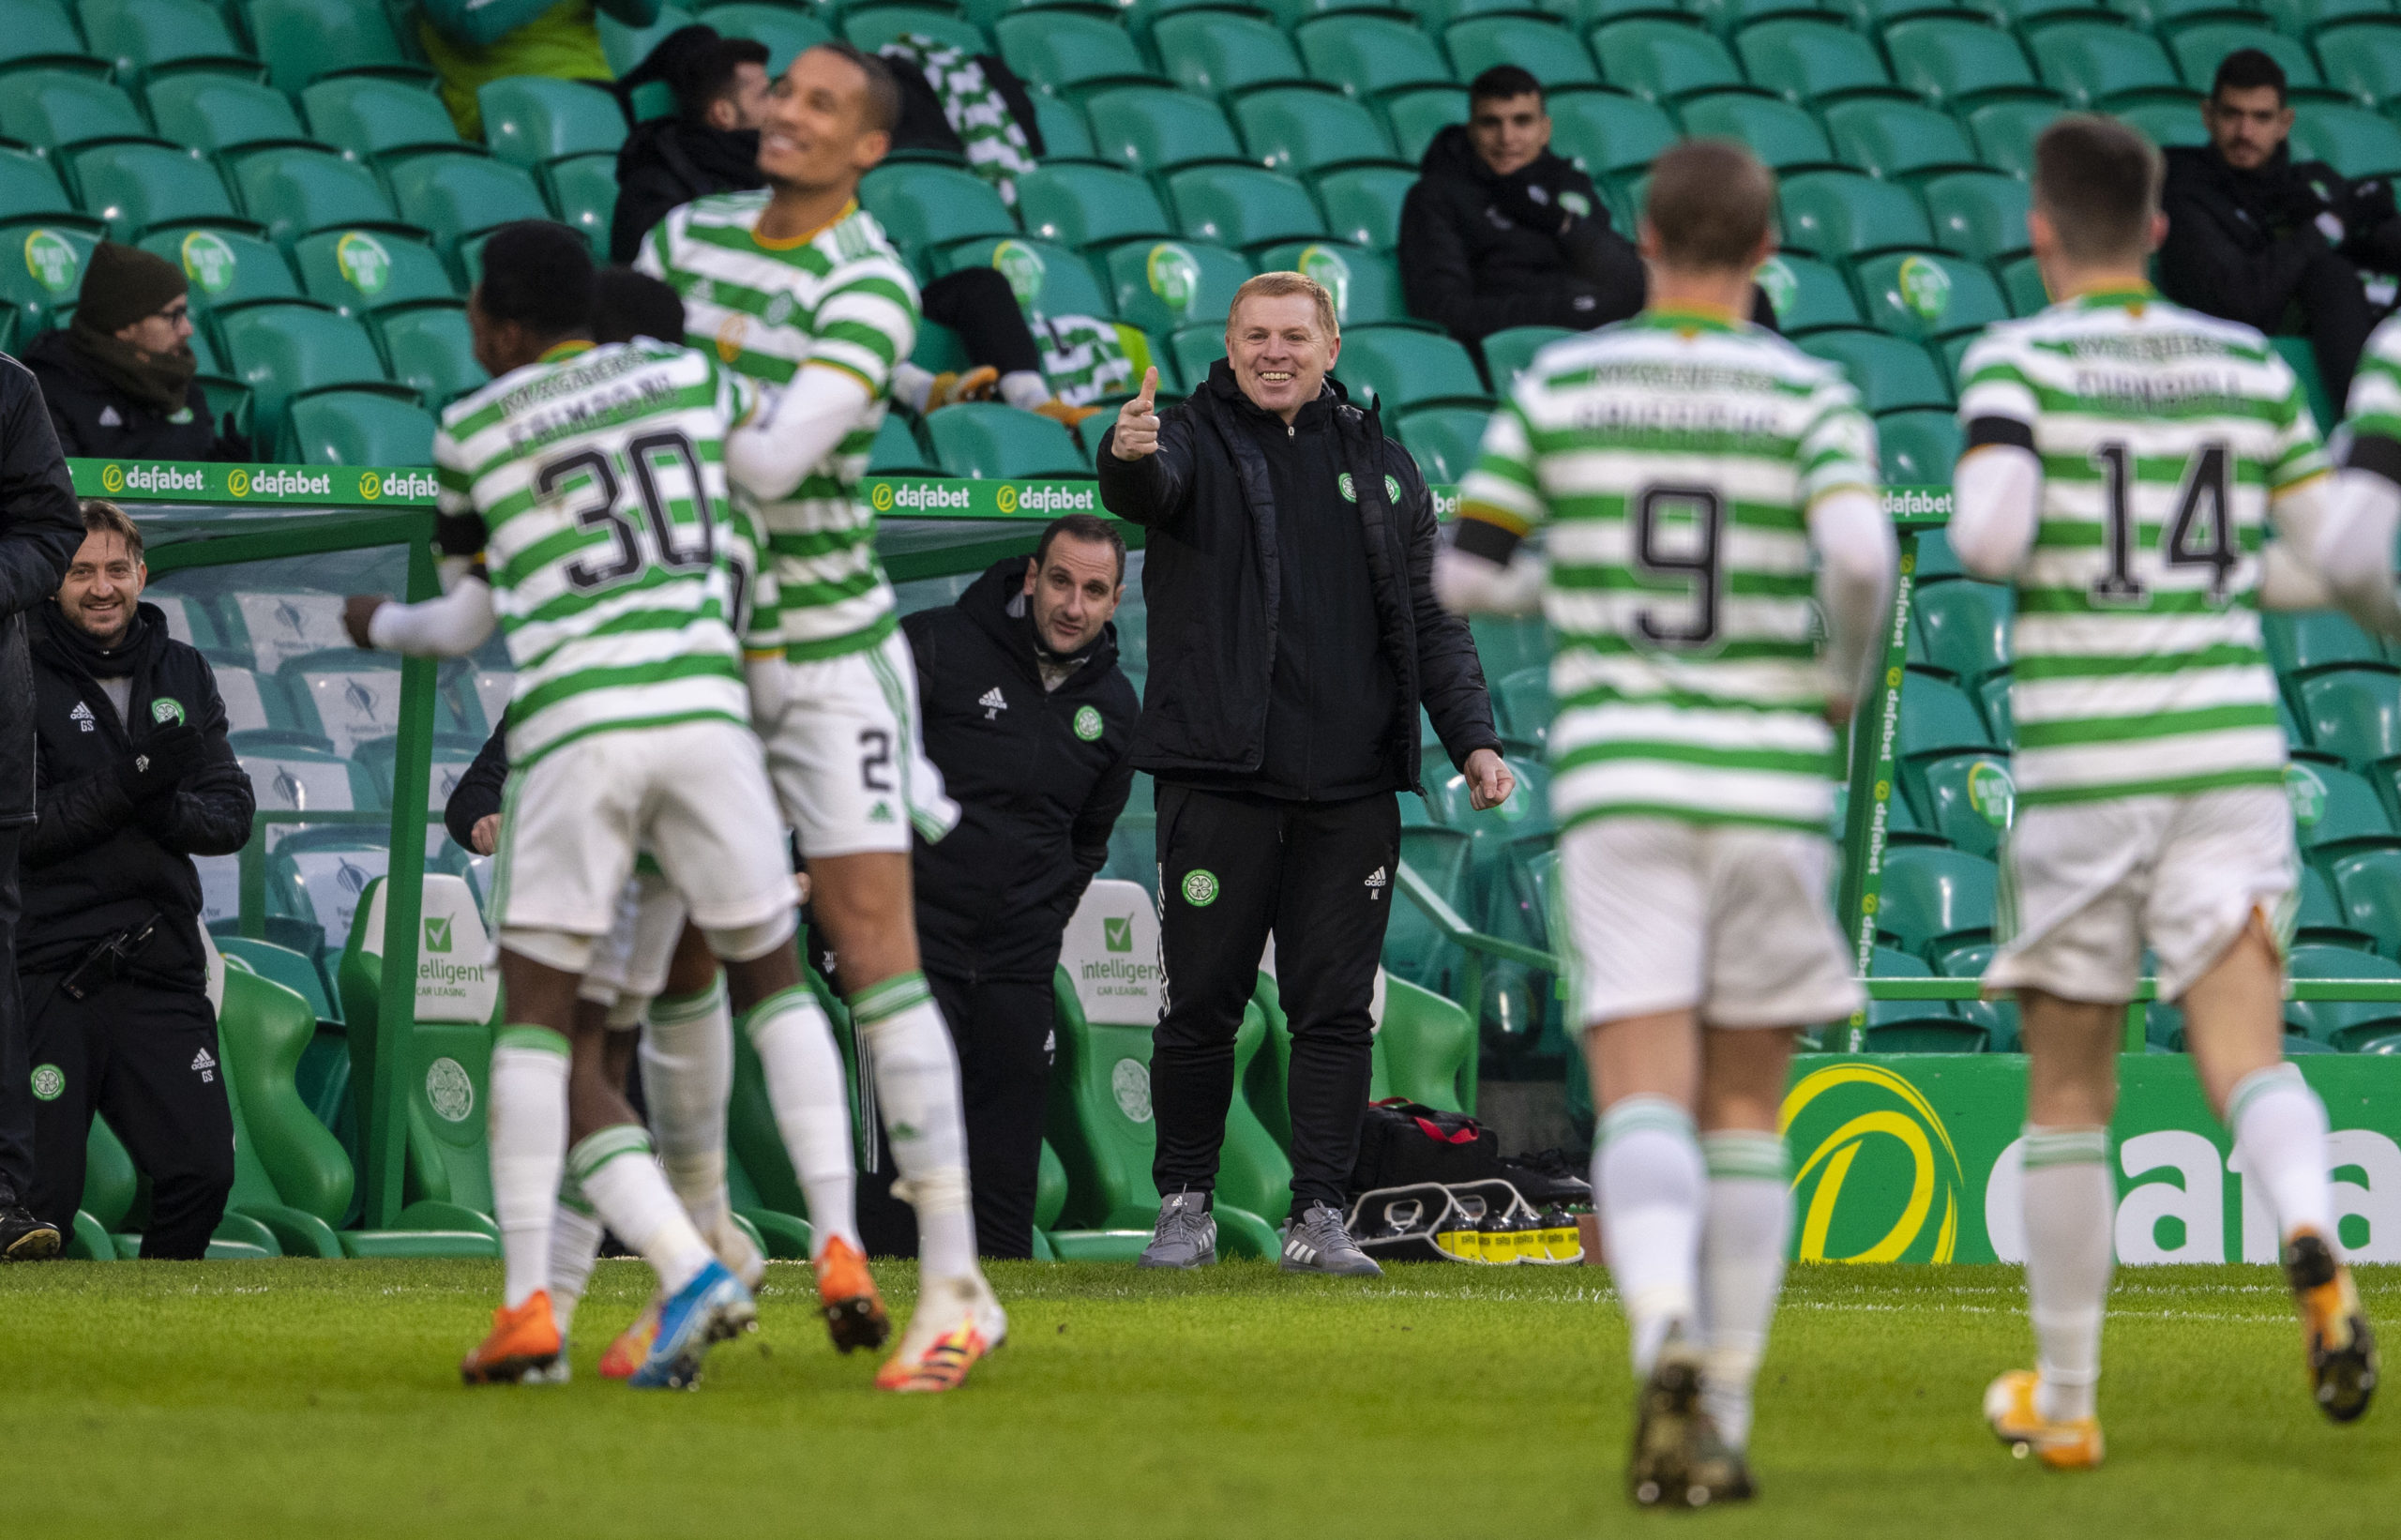 Screamers only, excellent shape: 3 things we learned from Celtic 3-0 Dundee United